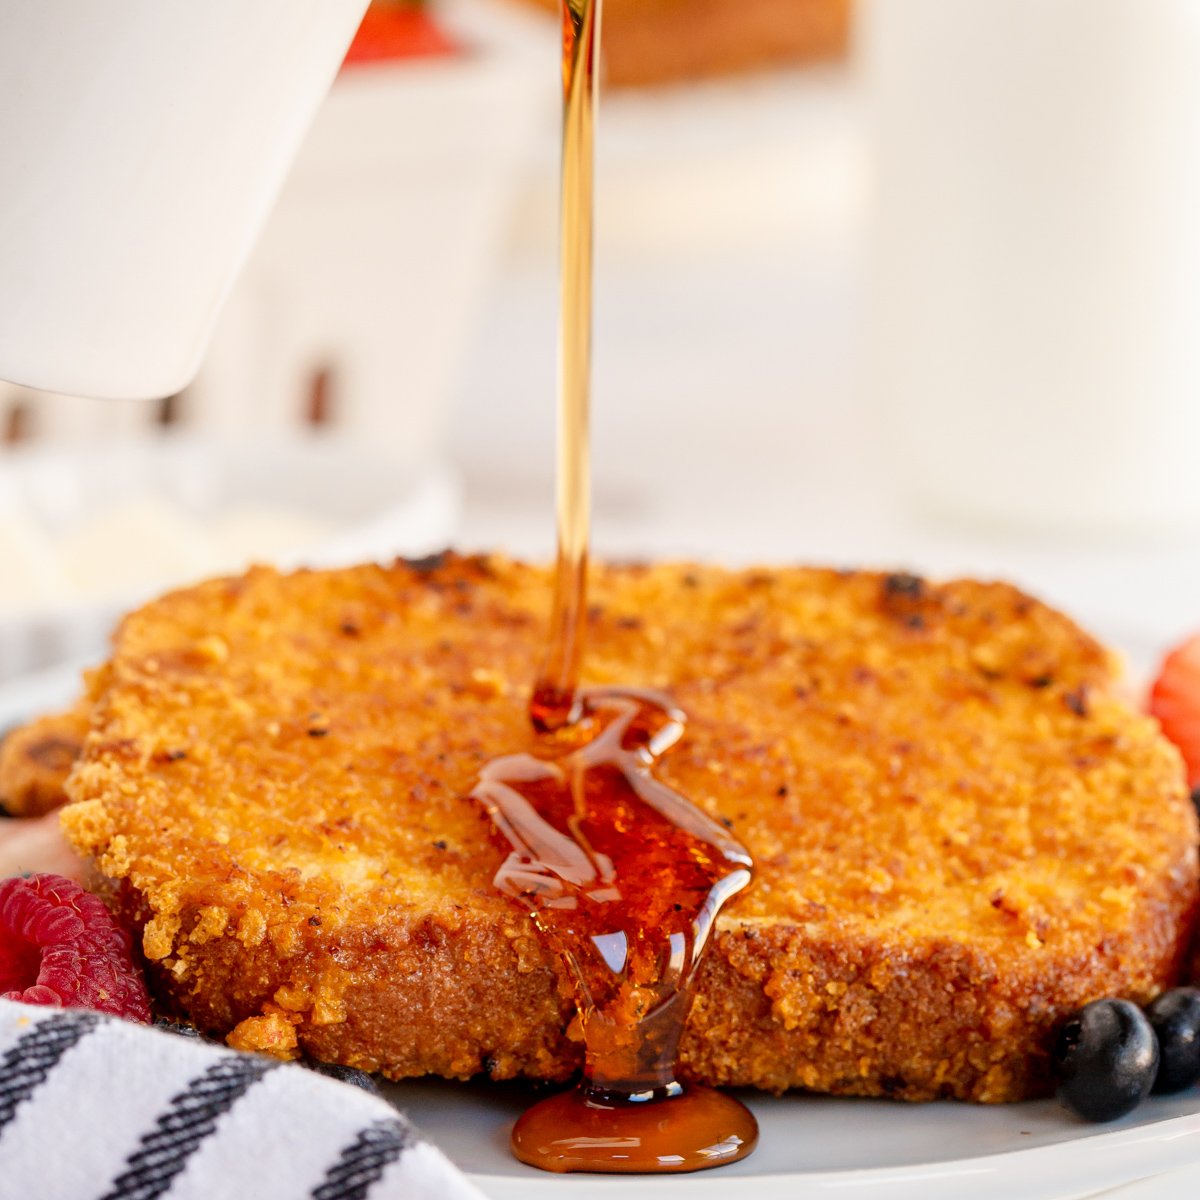 crunchy french toast with syrup being poured over